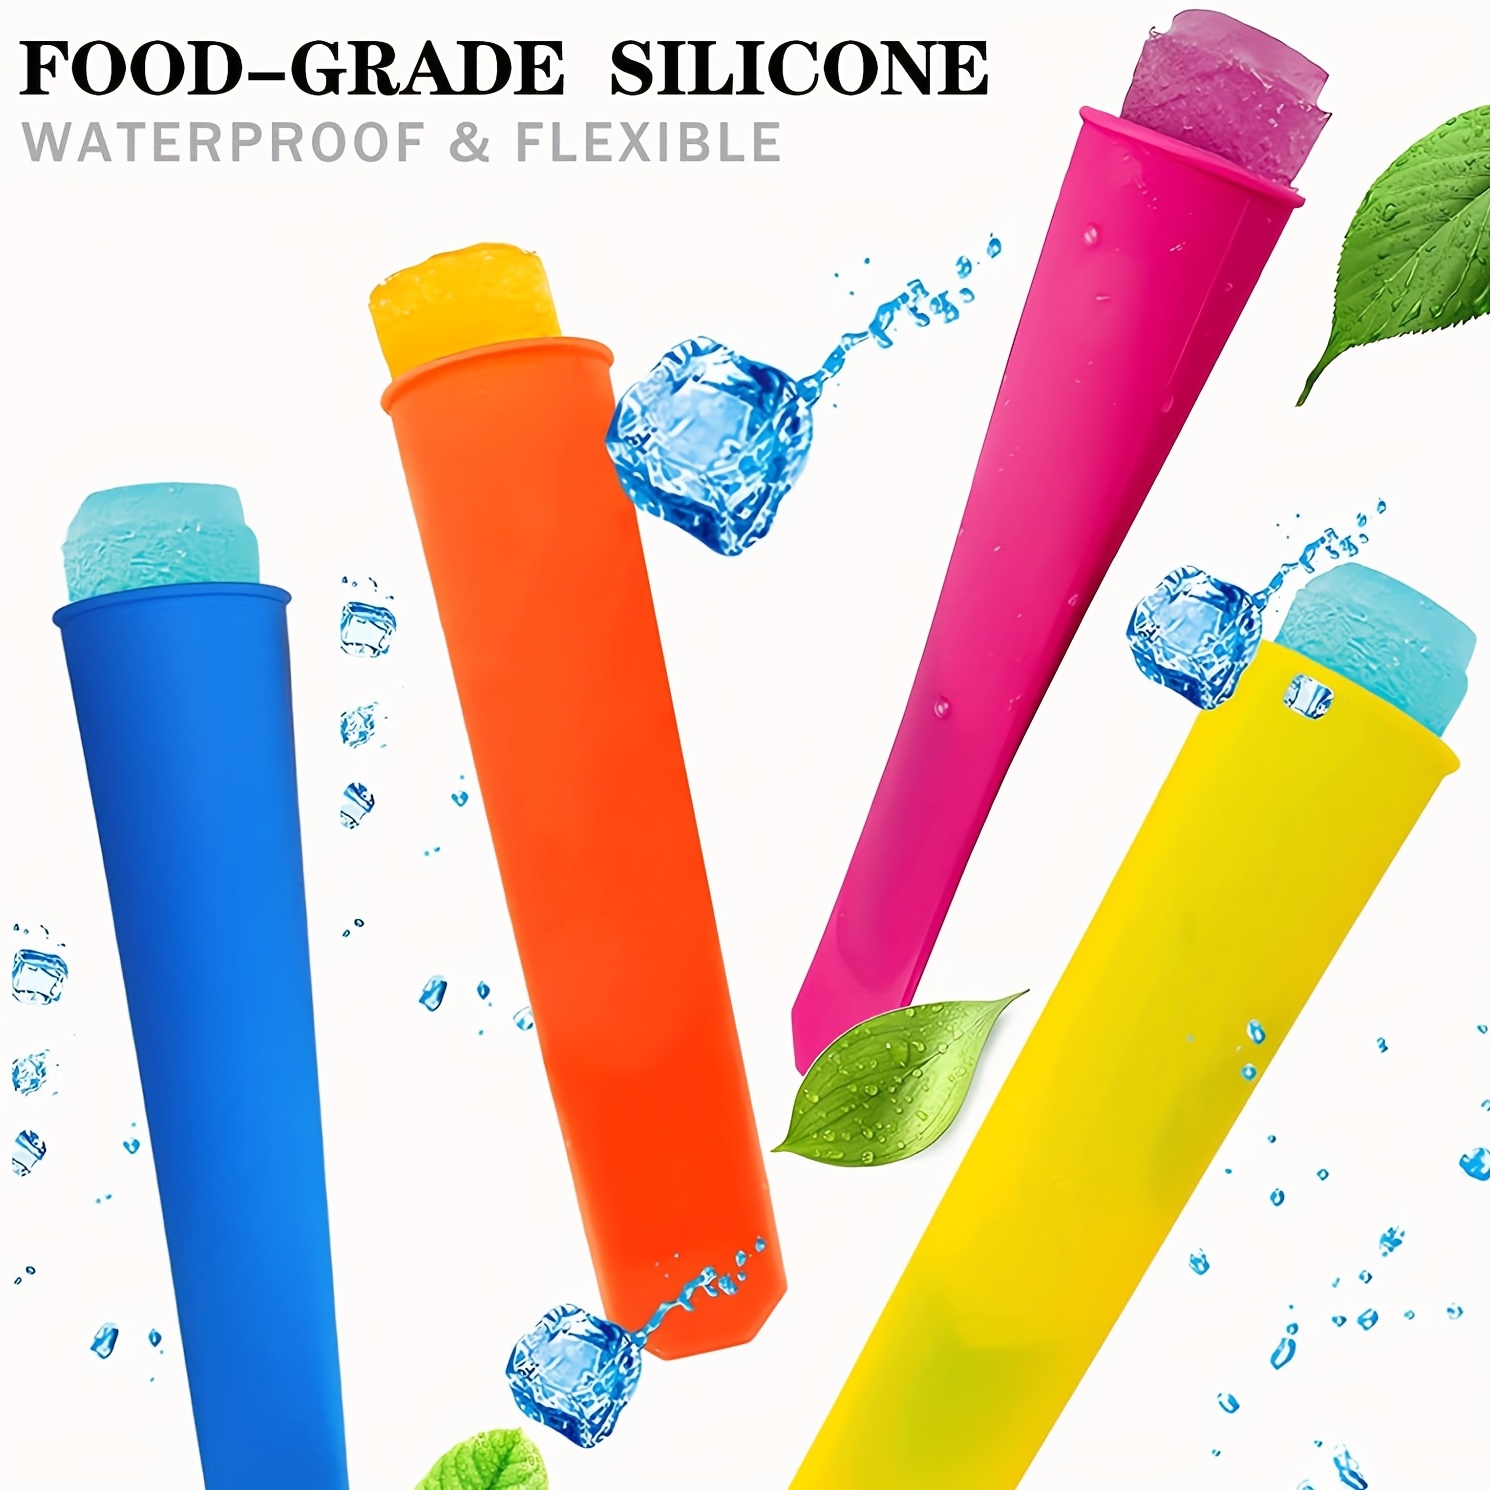 6PCS Popsicle Molds Silicone Reusable Easy Release Ice Maker Homemade  Snacks DIY